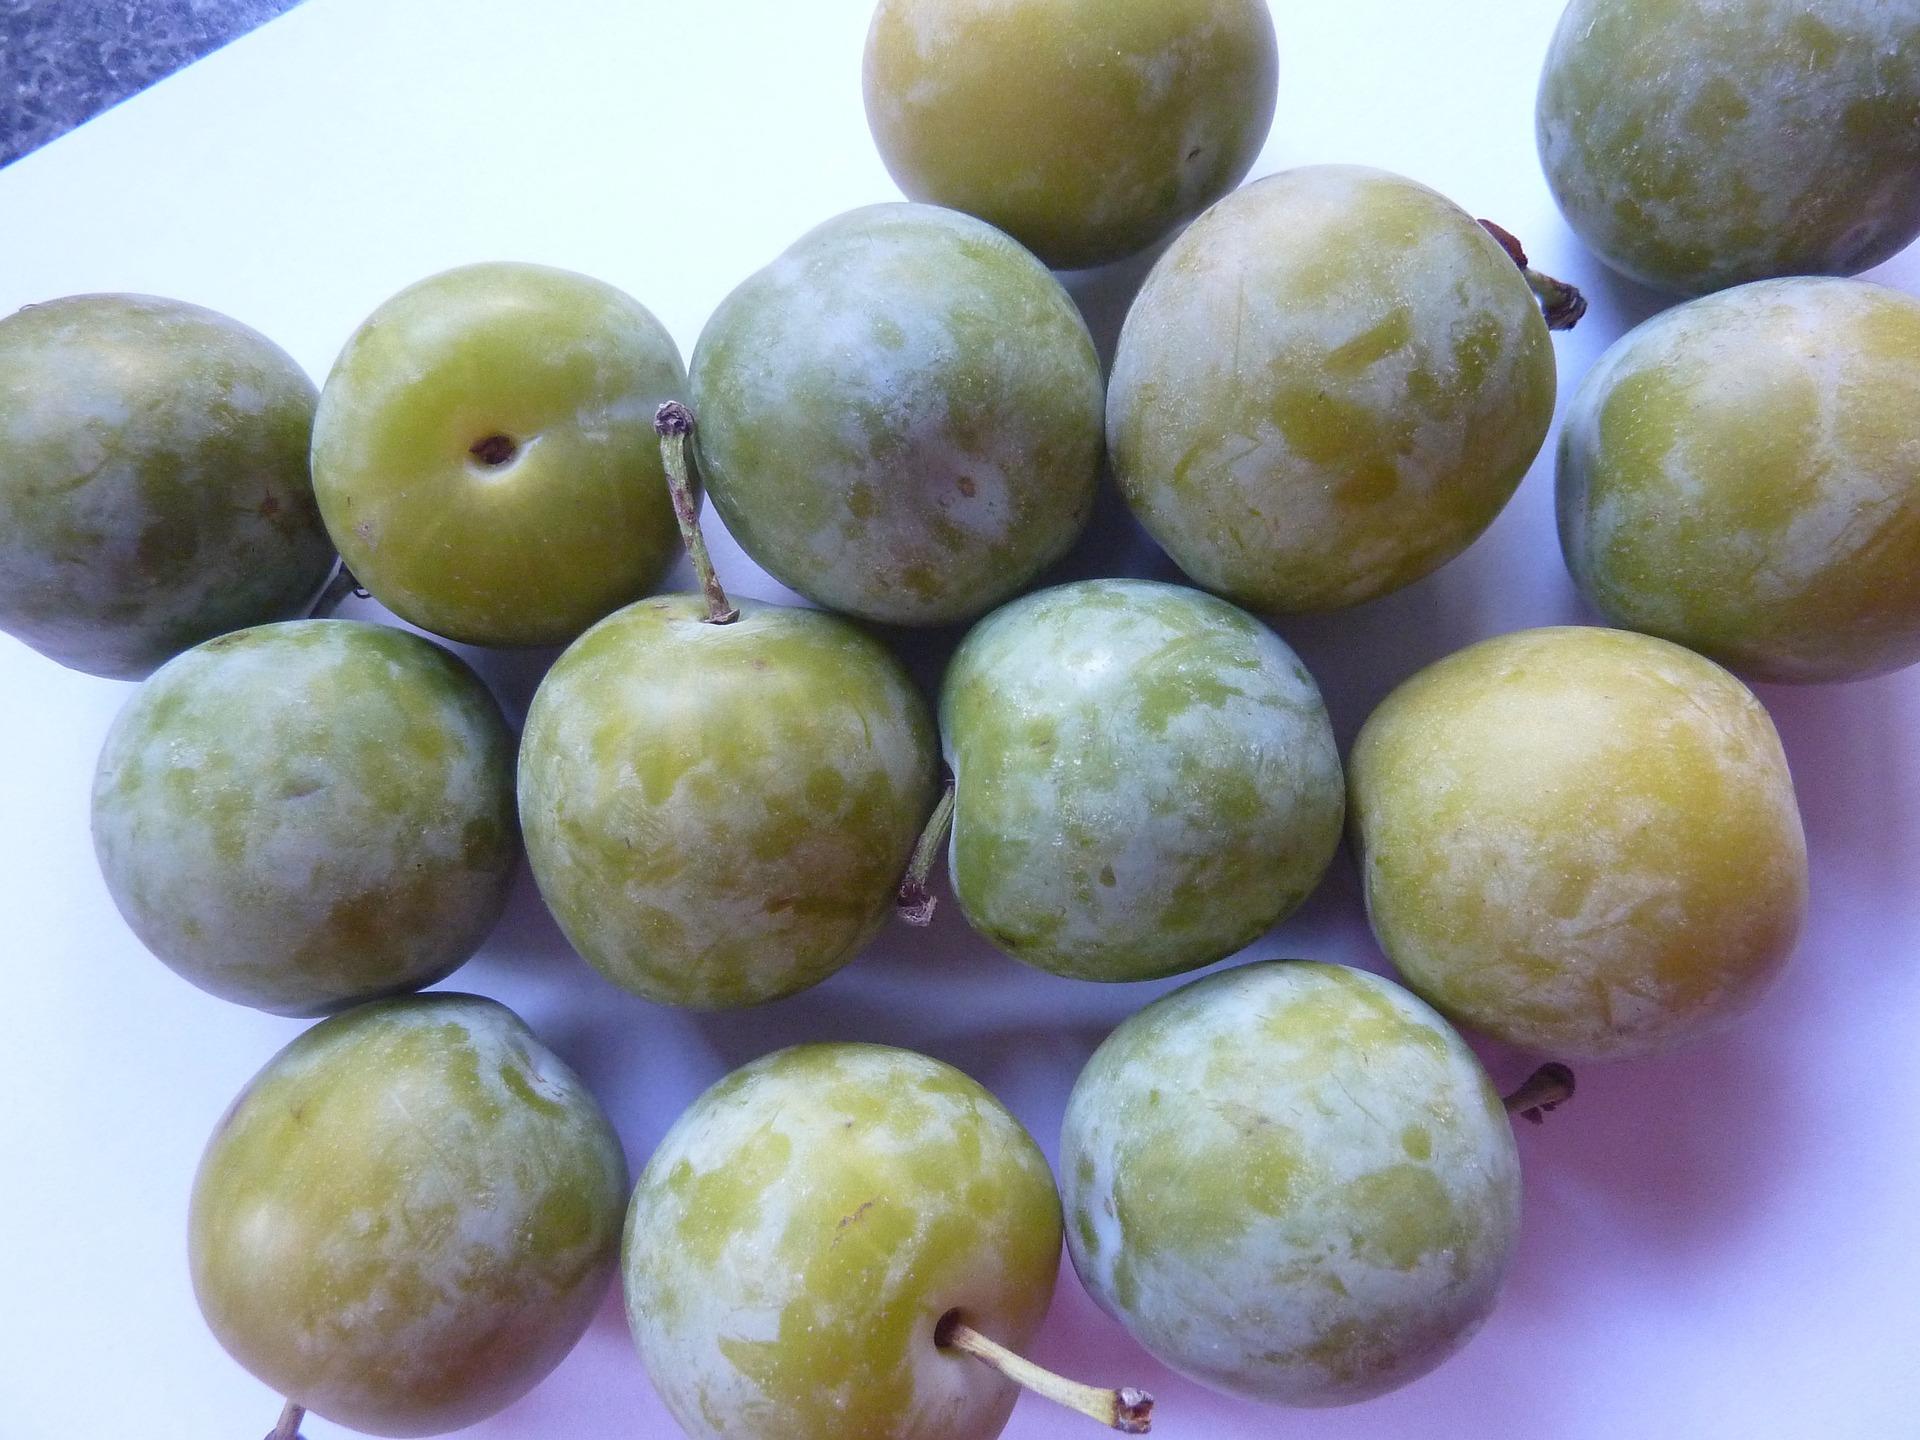 greengages 2795632_1920